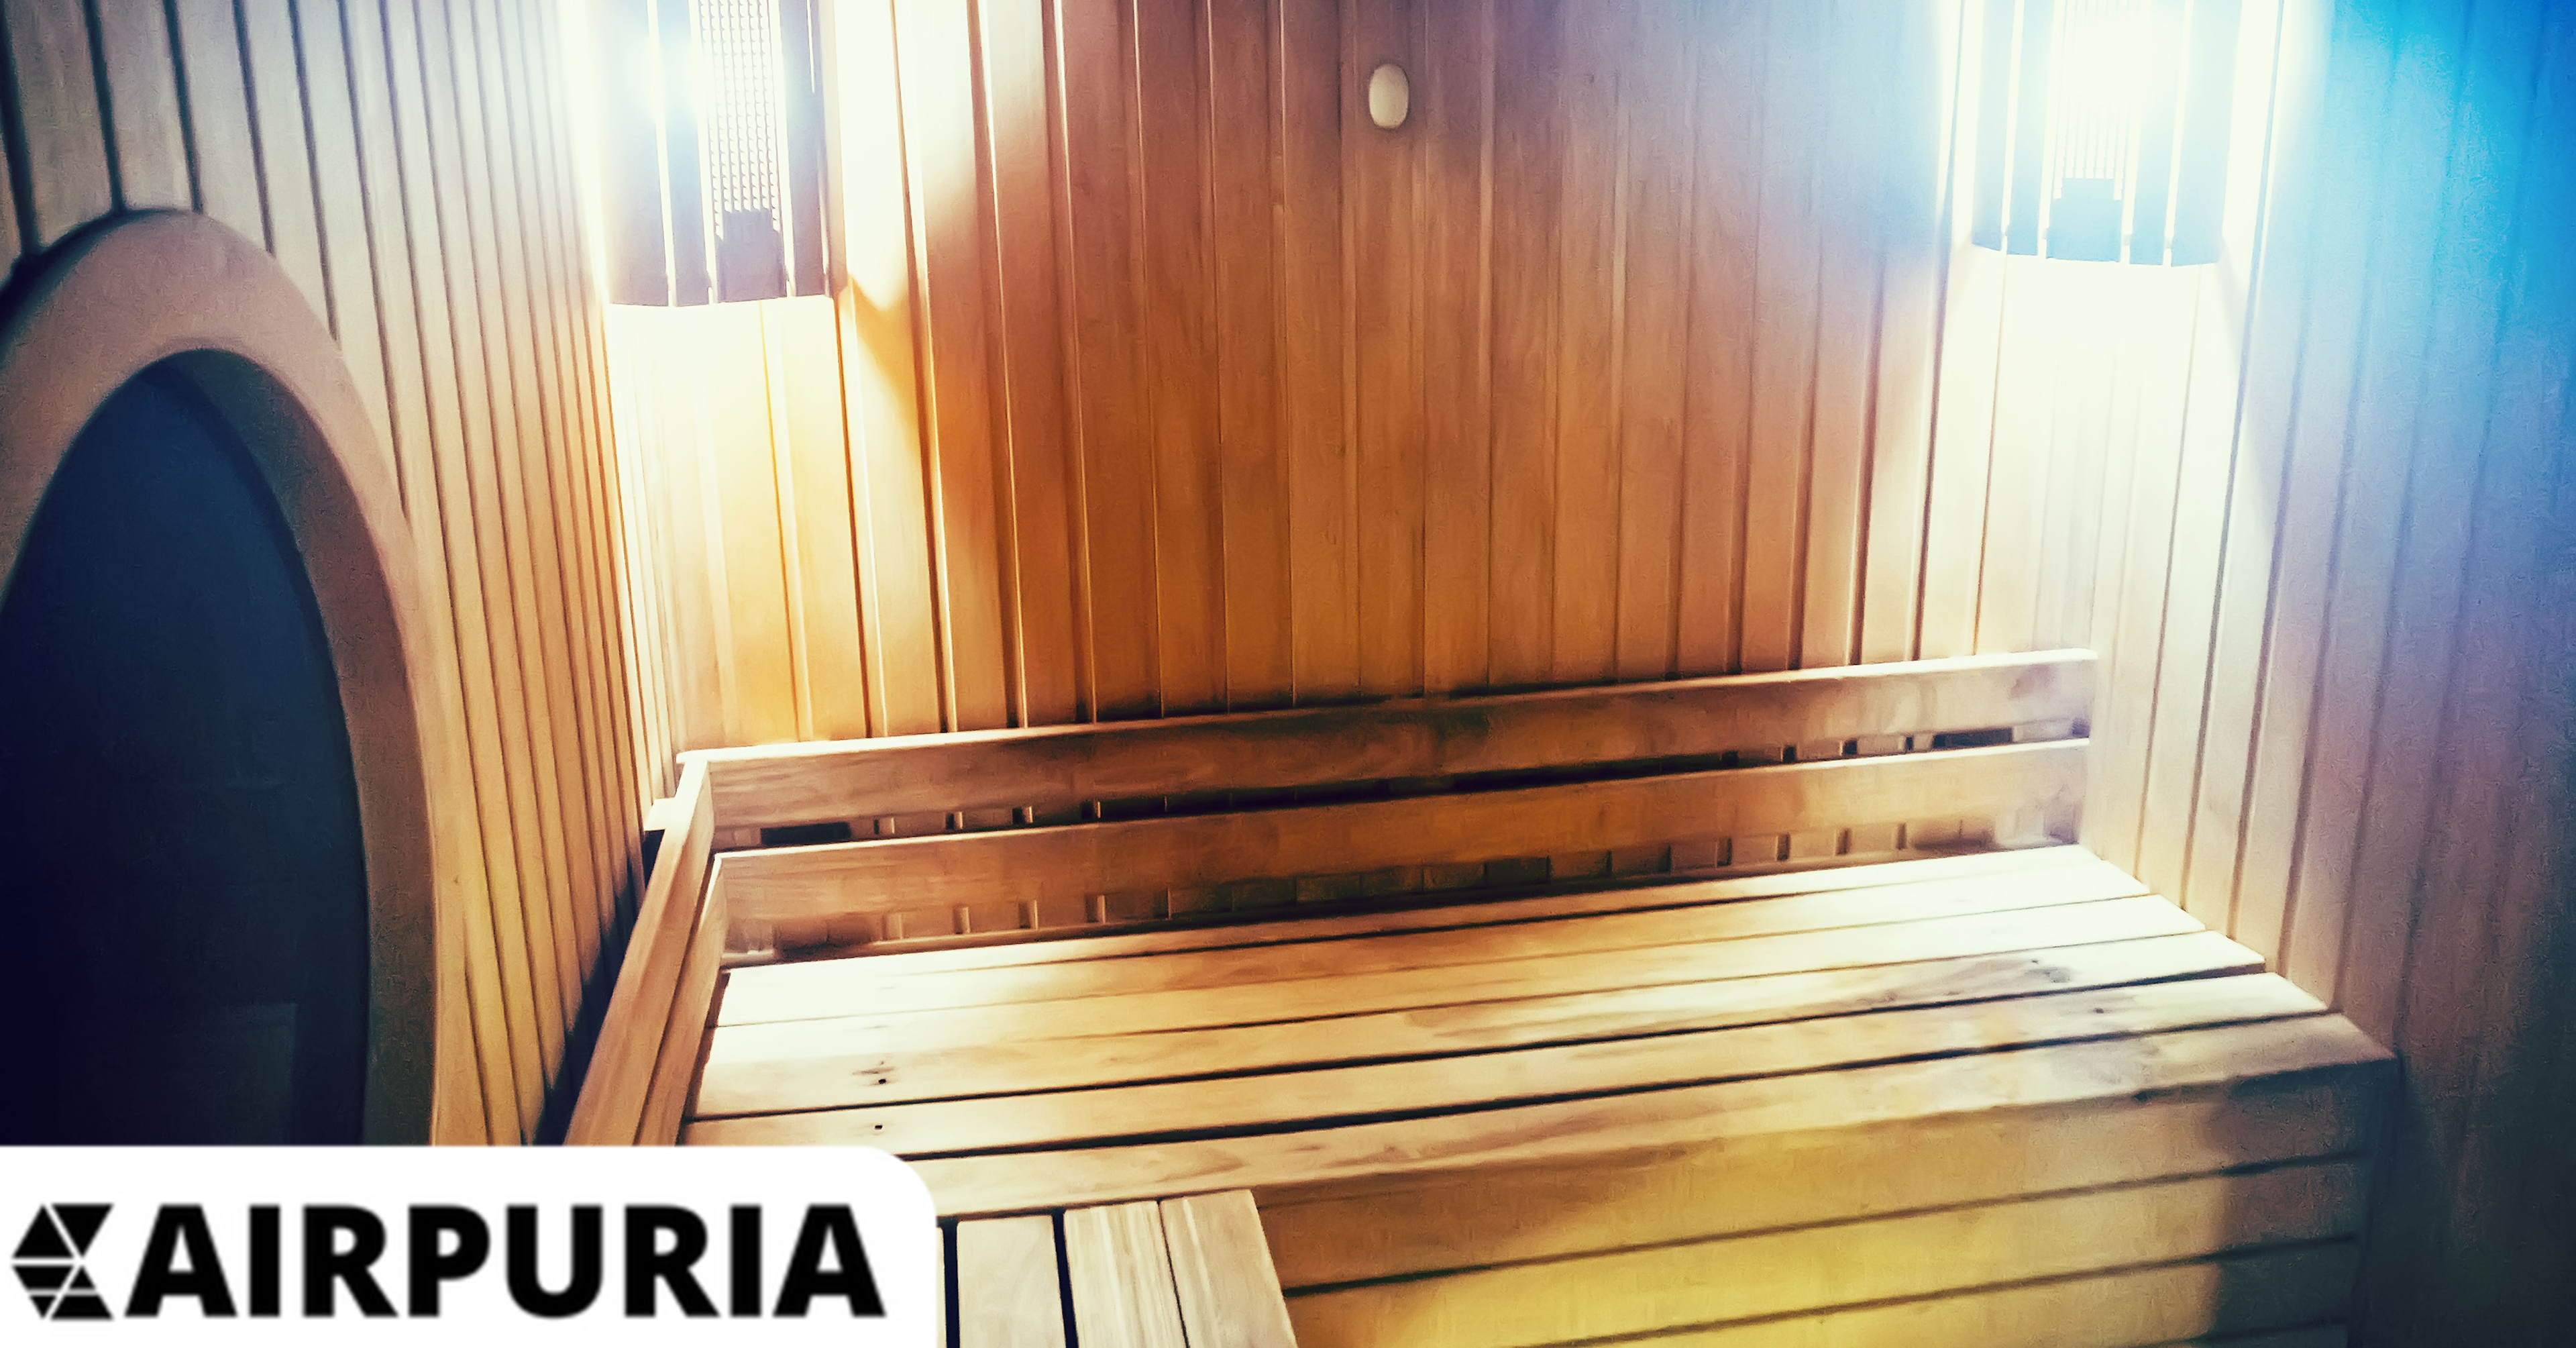 Image showing how Infrared saunas are safe and can help you lose weight.